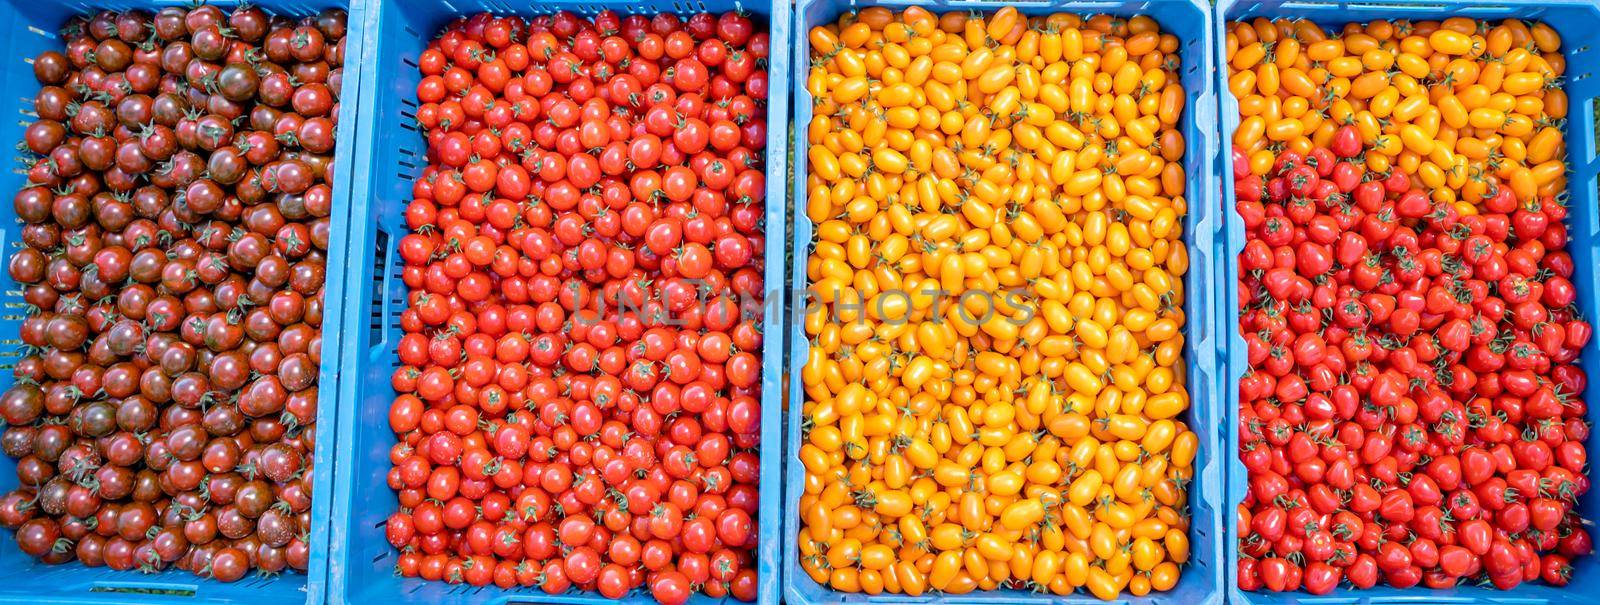 freshly picked yellow and red tomatoes in a crate by Edophoto